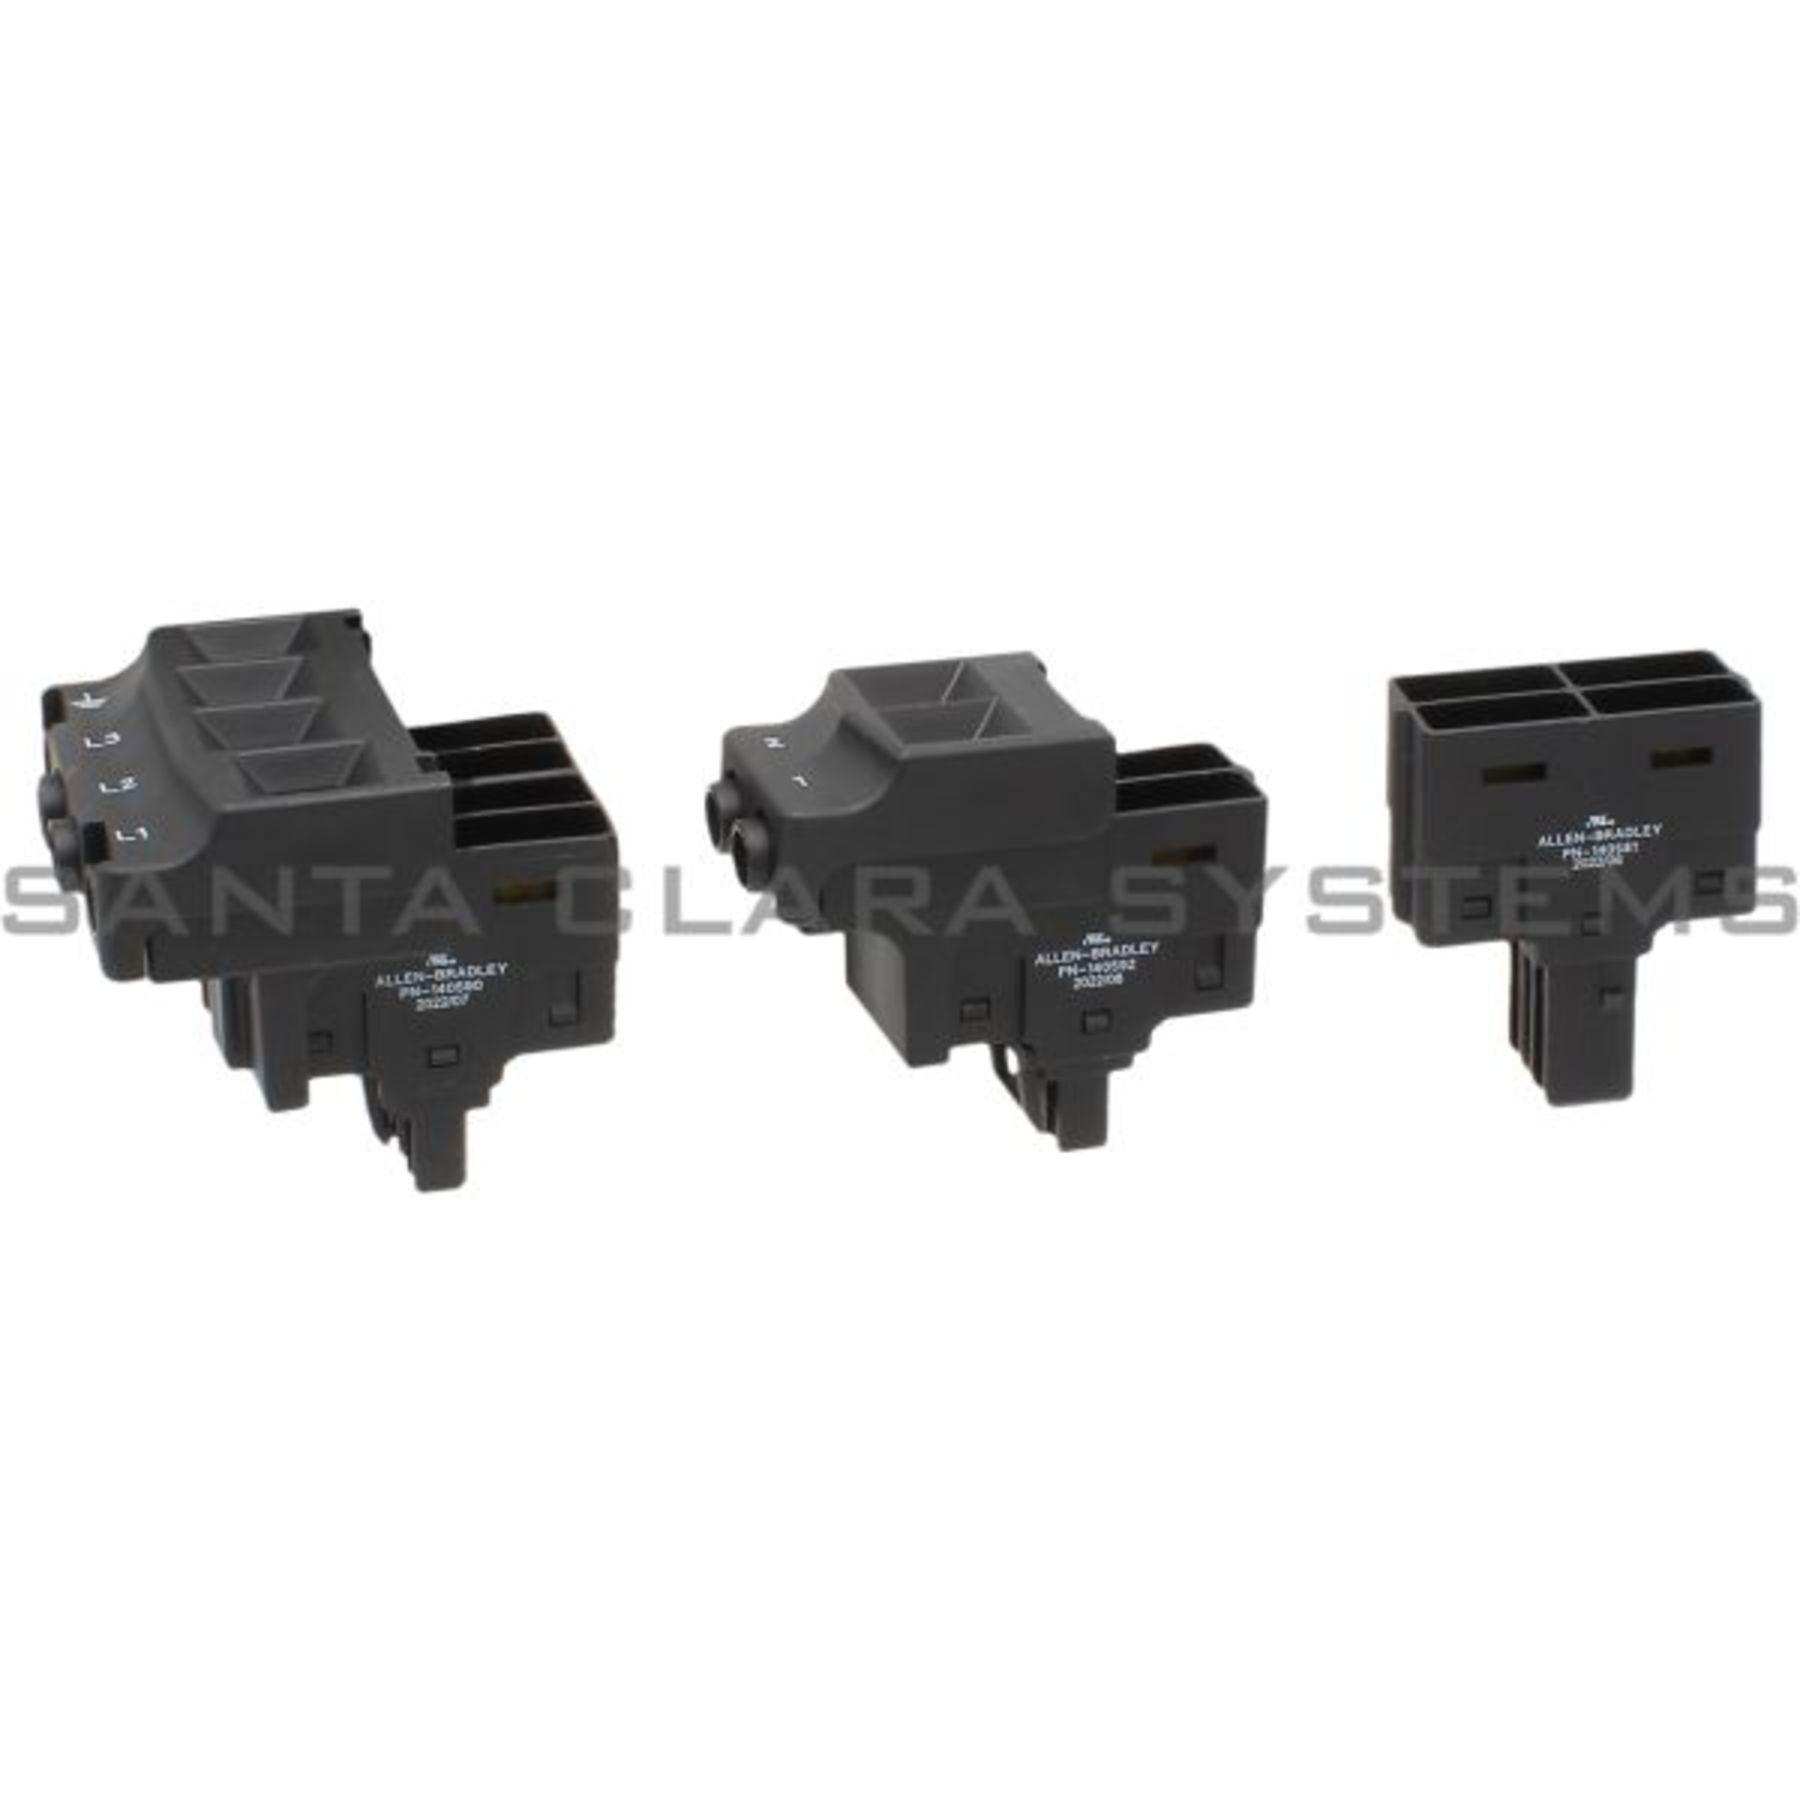 Rockwell Automation 2198-H070-ADP-T Shared Bus Connector Kit, For